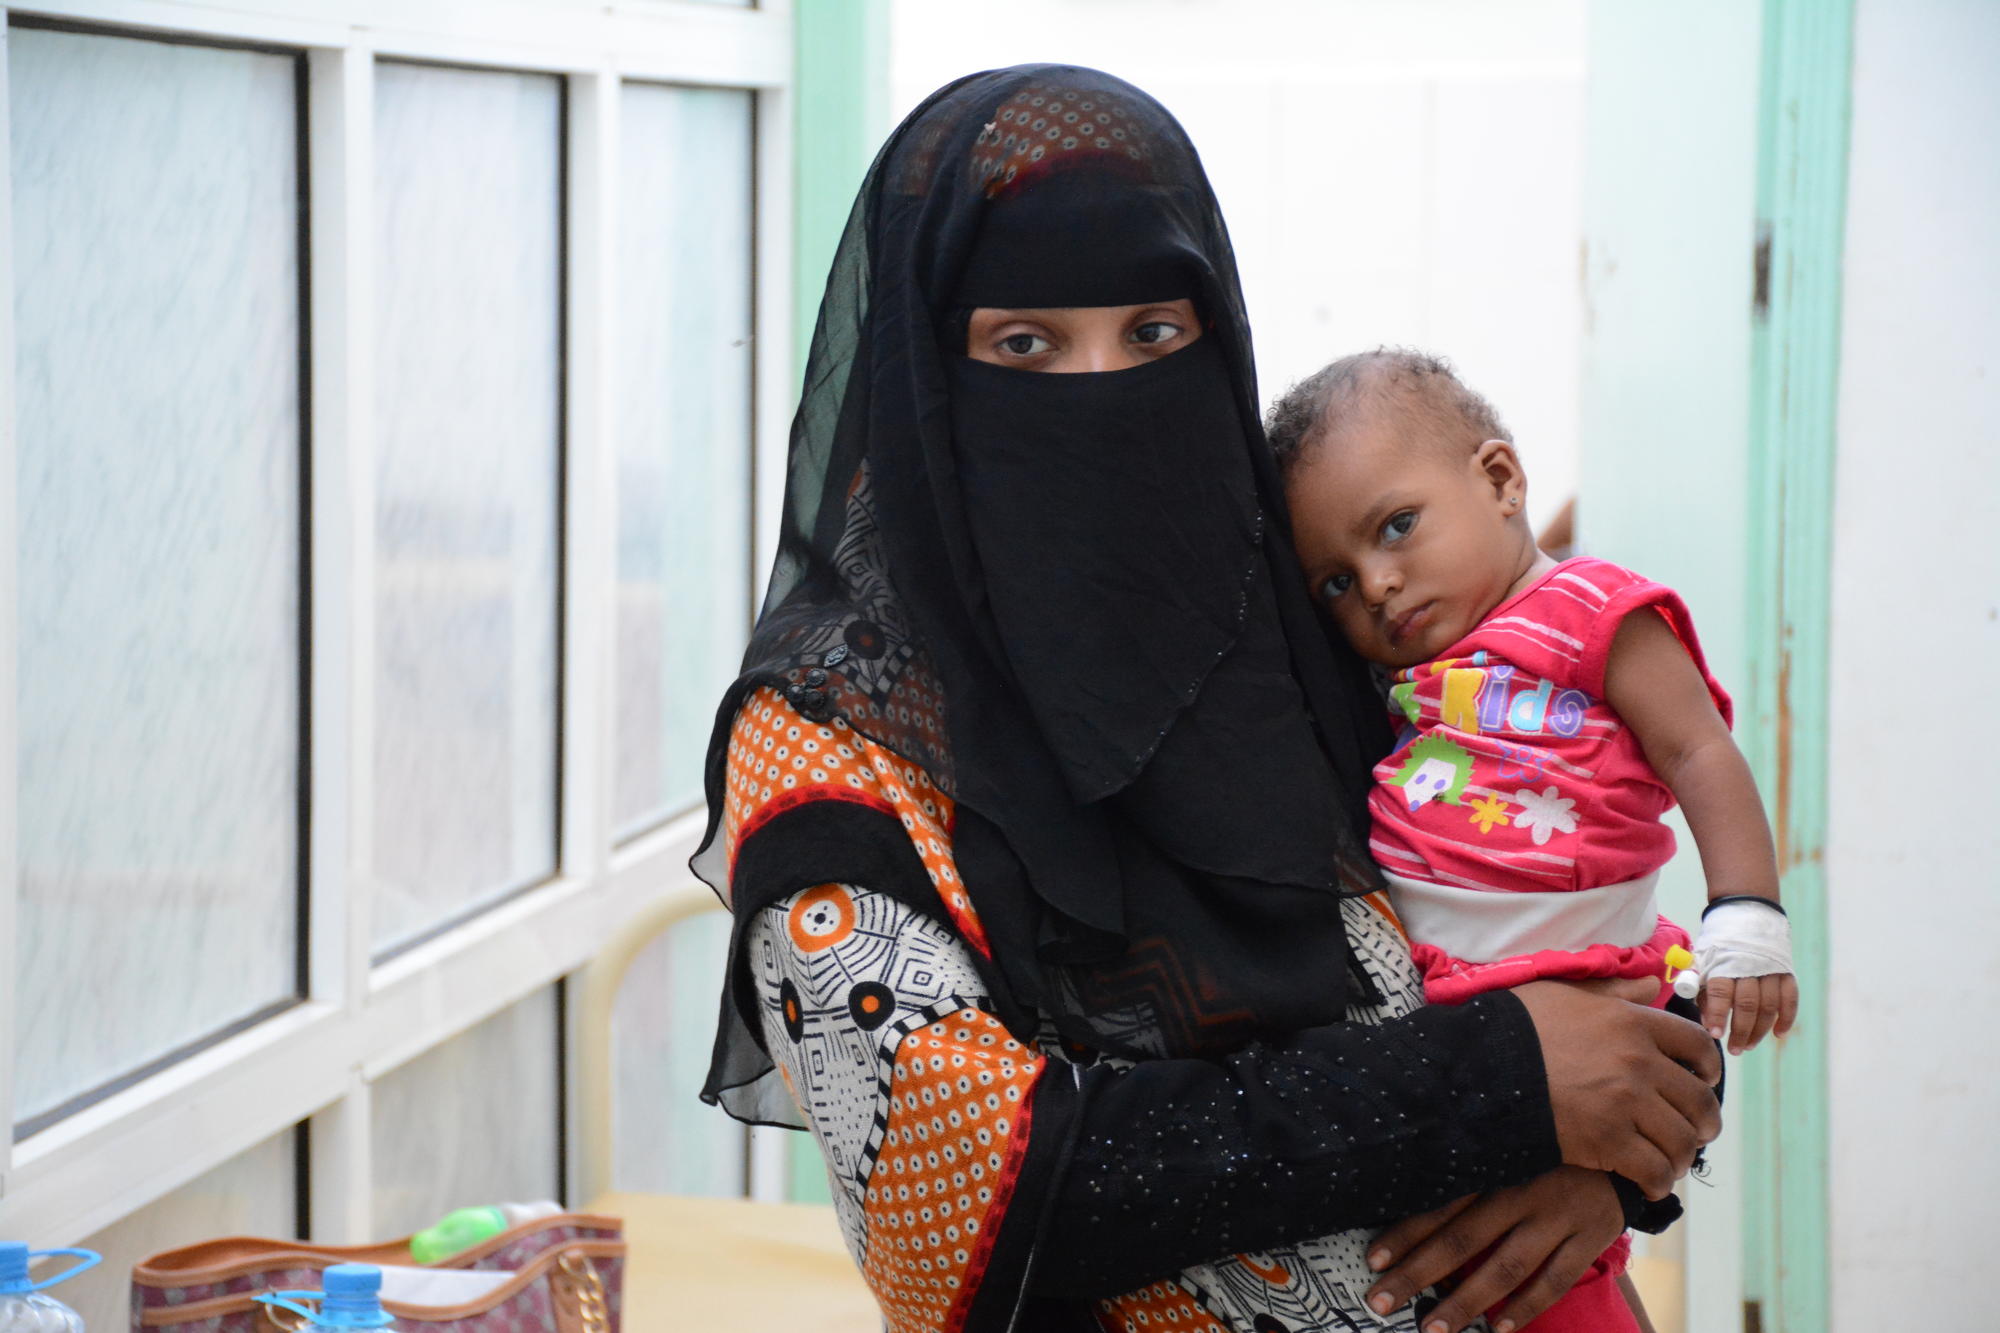 “The pain of motherhood in Yemen is on a different scale”